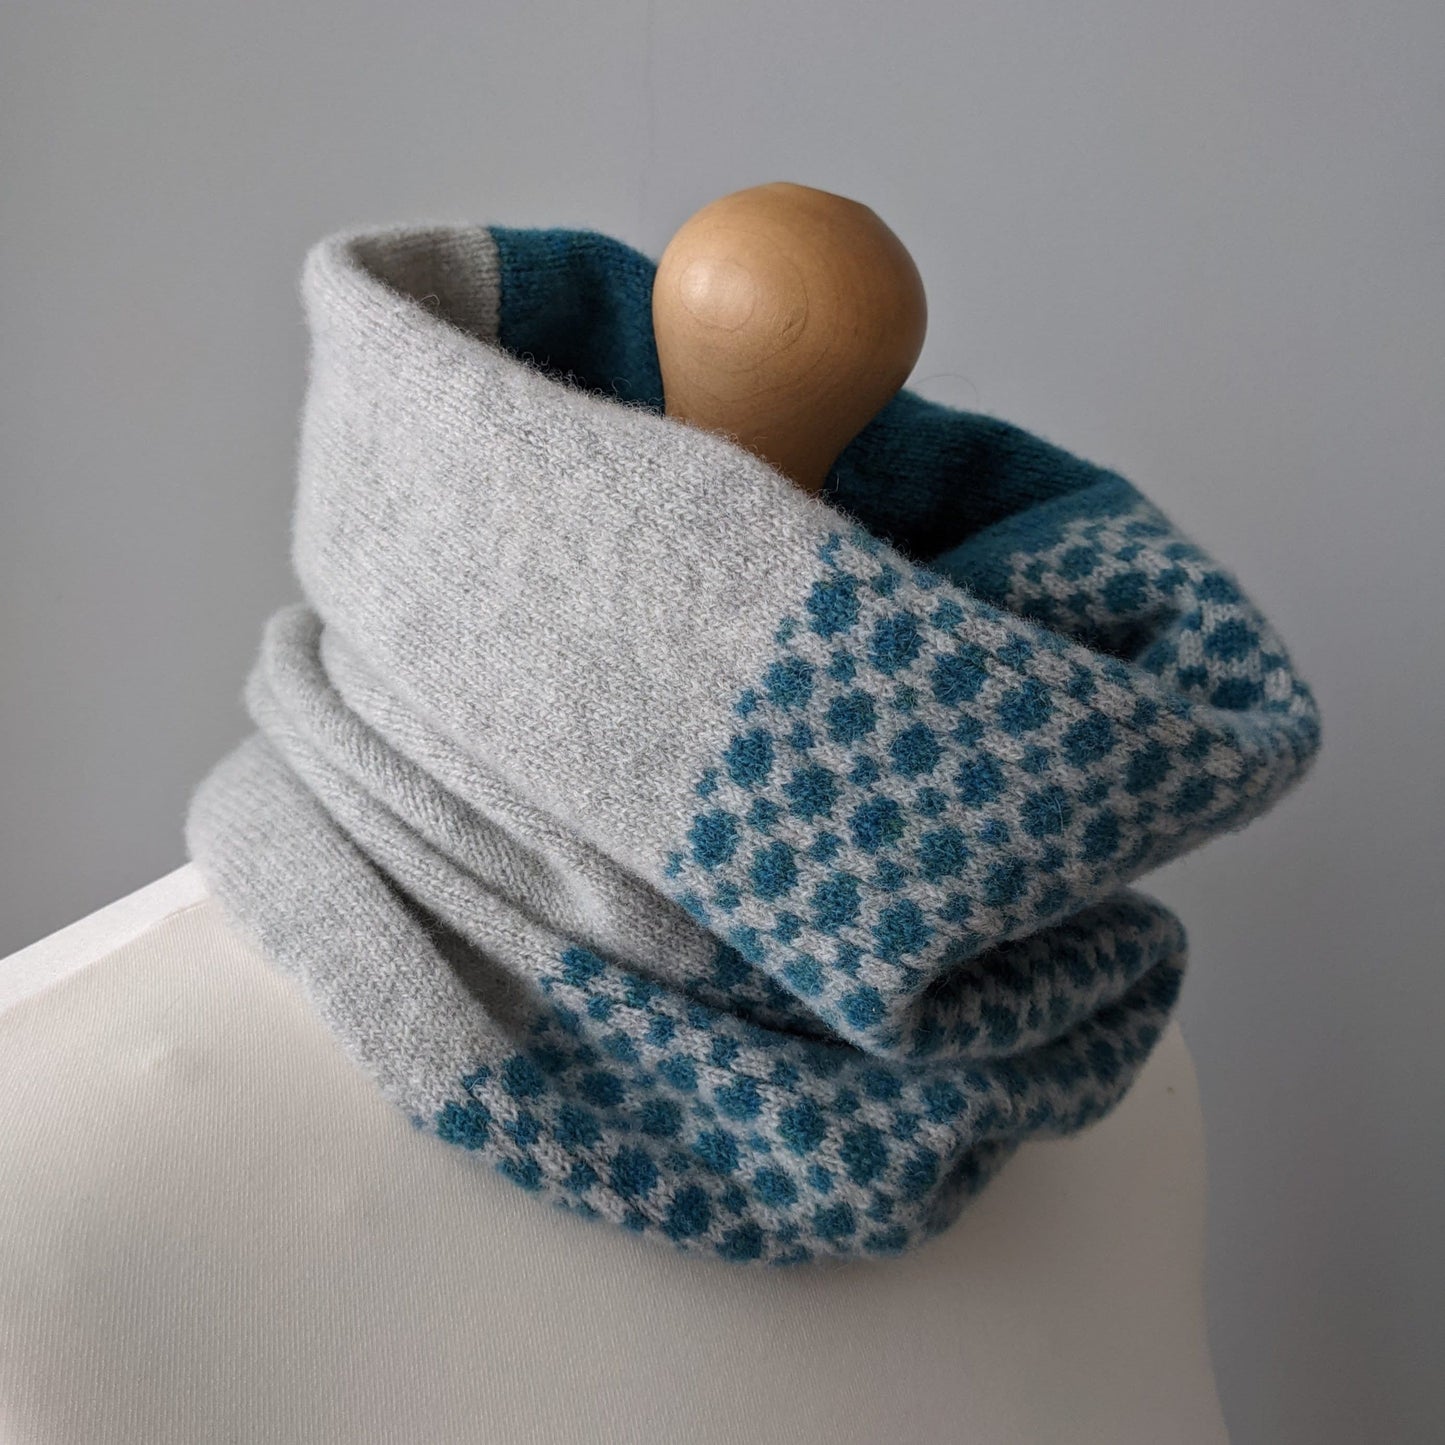 Lambswool knitted Fair Isle cowl in dots and spots design - pale grey and  petrol blue.